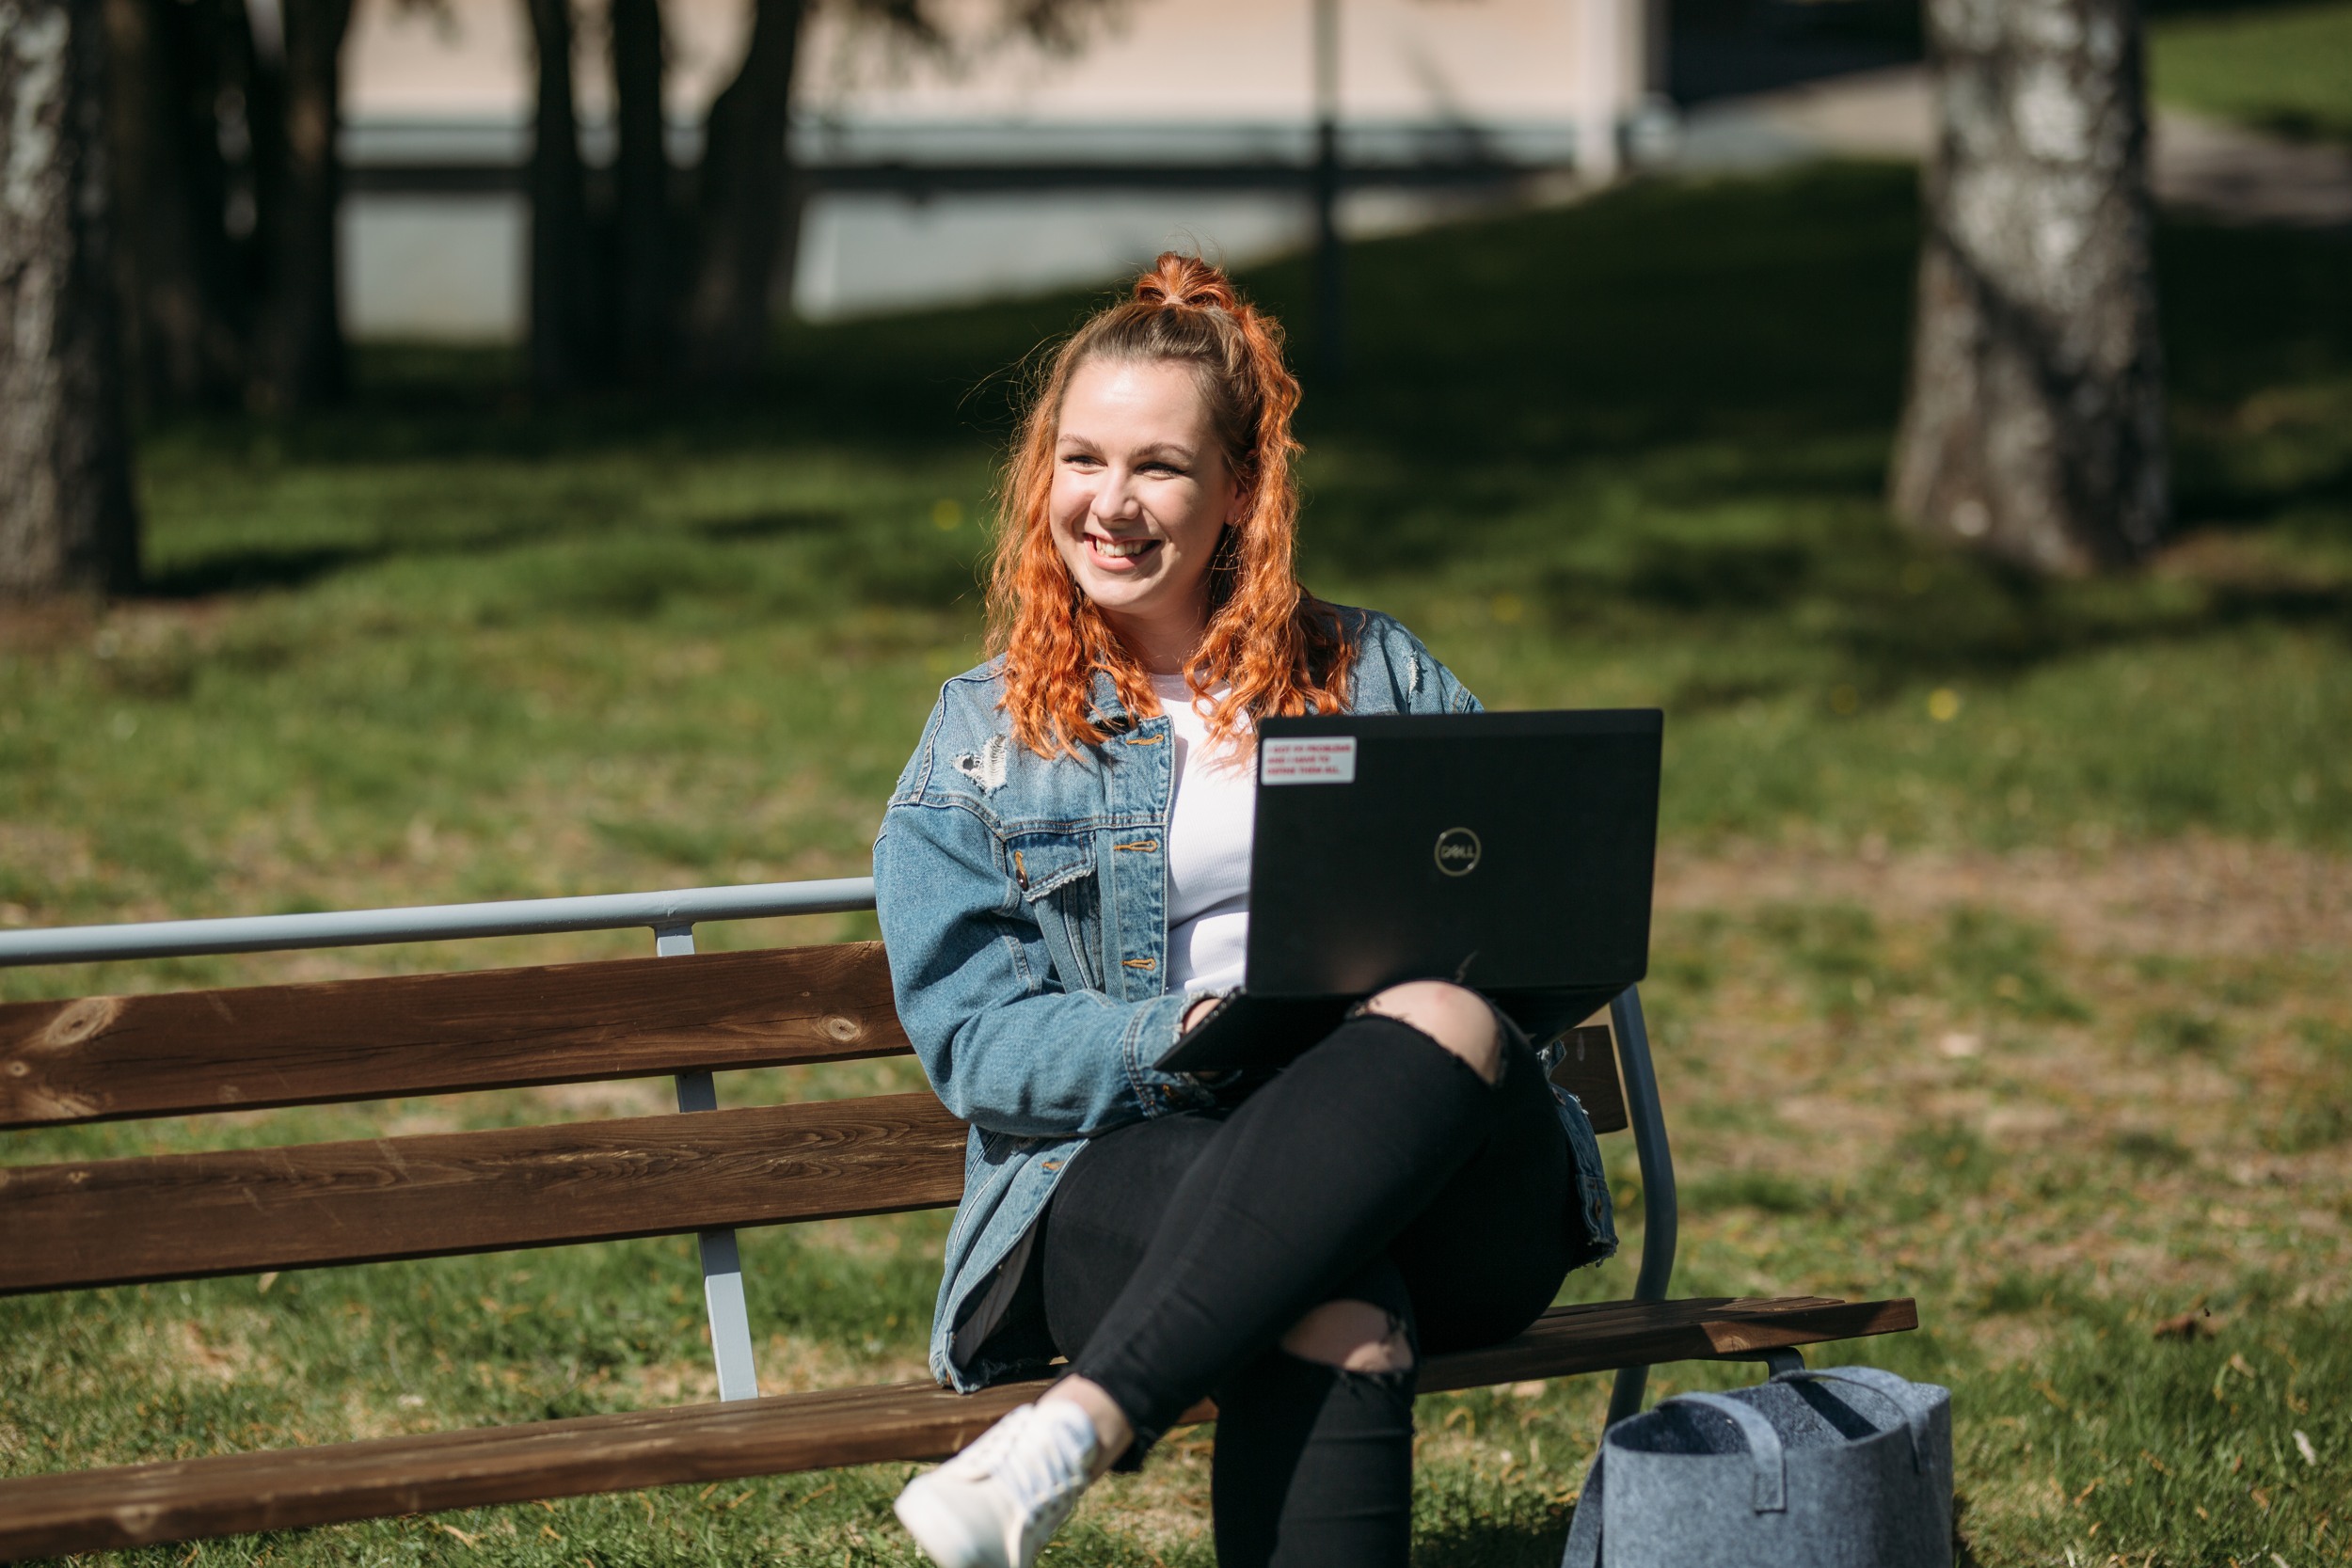 A red-haired woman sits on a park bench with a computer, smiling and looking past the camera.